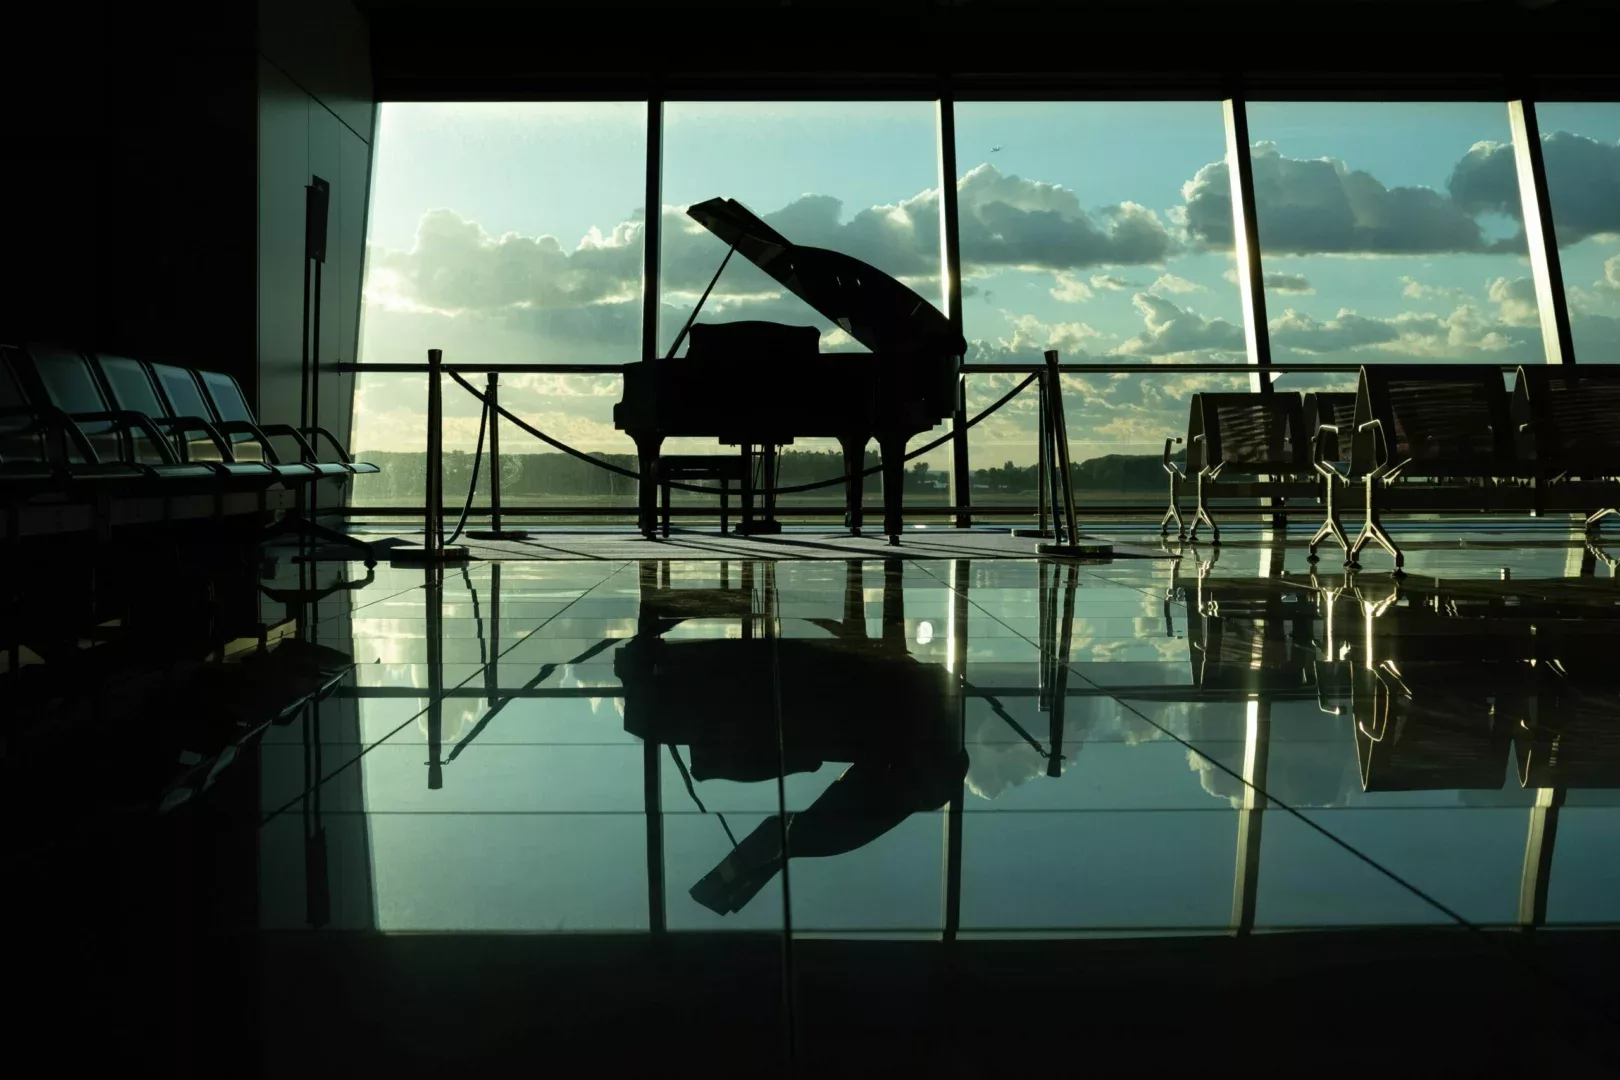 grand piano in an airport